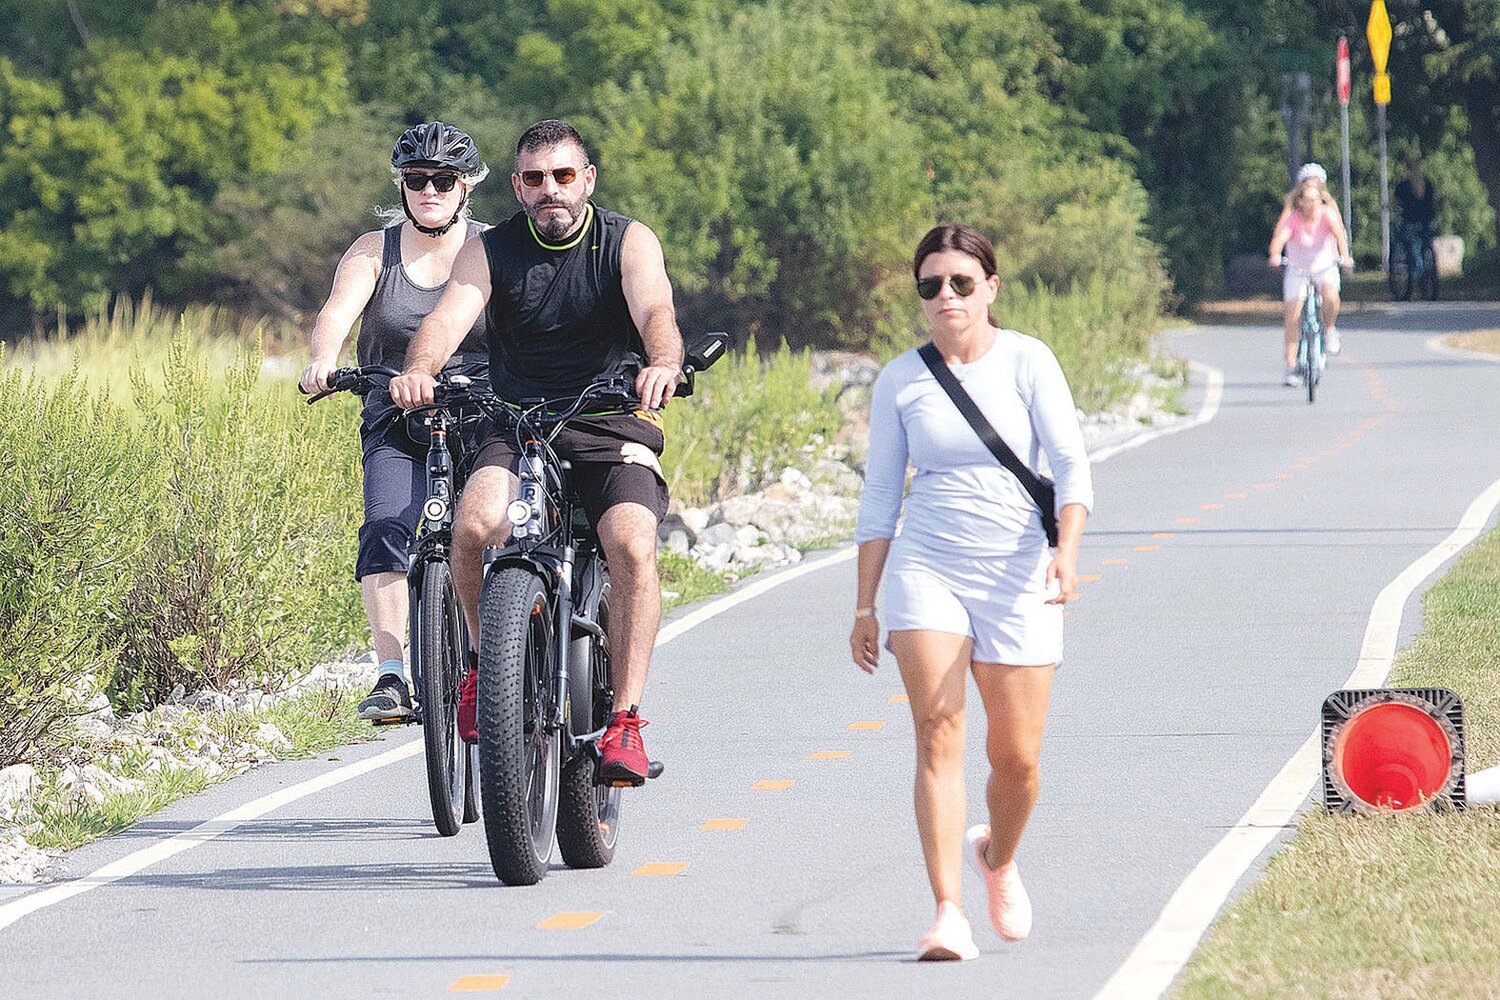 The Rhode Island General Assembly is considering a bill that would make electric bicycles legal on all the state’s bike paths, including the East Bay Bike Path, shown here during a warm day last summer. The bill was approved by a House committee earlier this month, and it may be heard by the full House of Representatives this week.